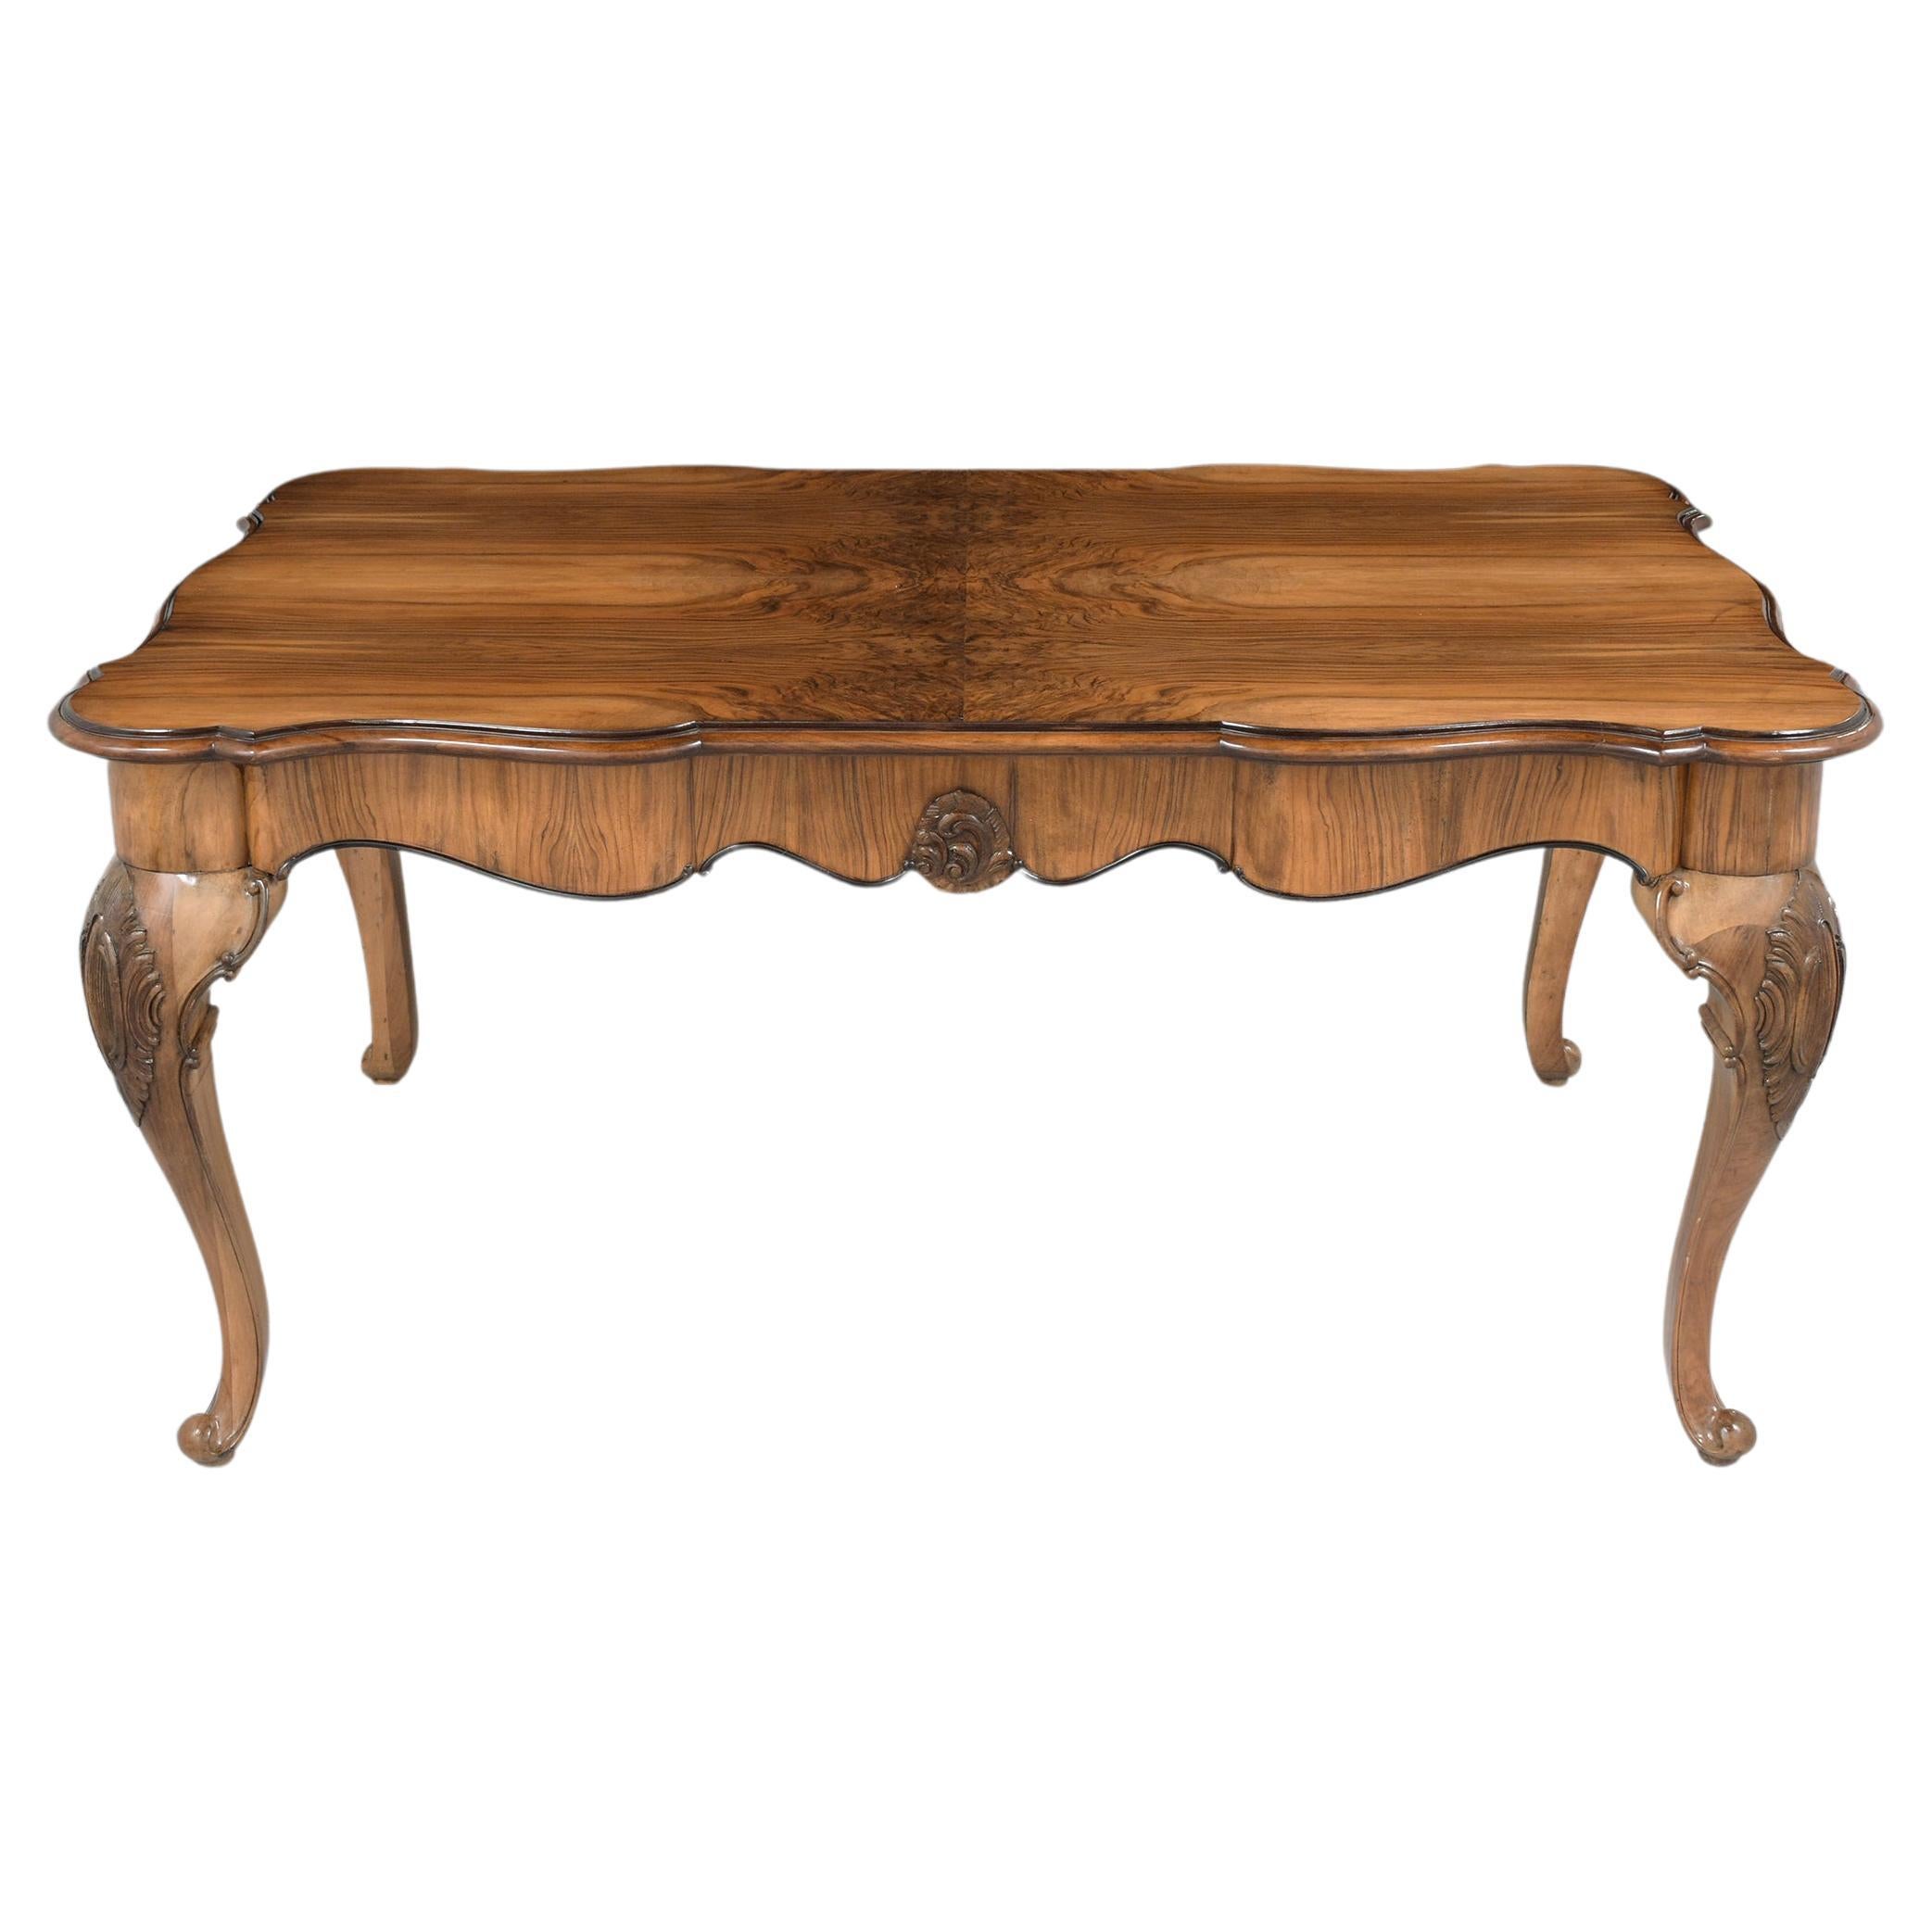 Late 19th-Century English Walnut Dining Table with Carved Cabriole Legs